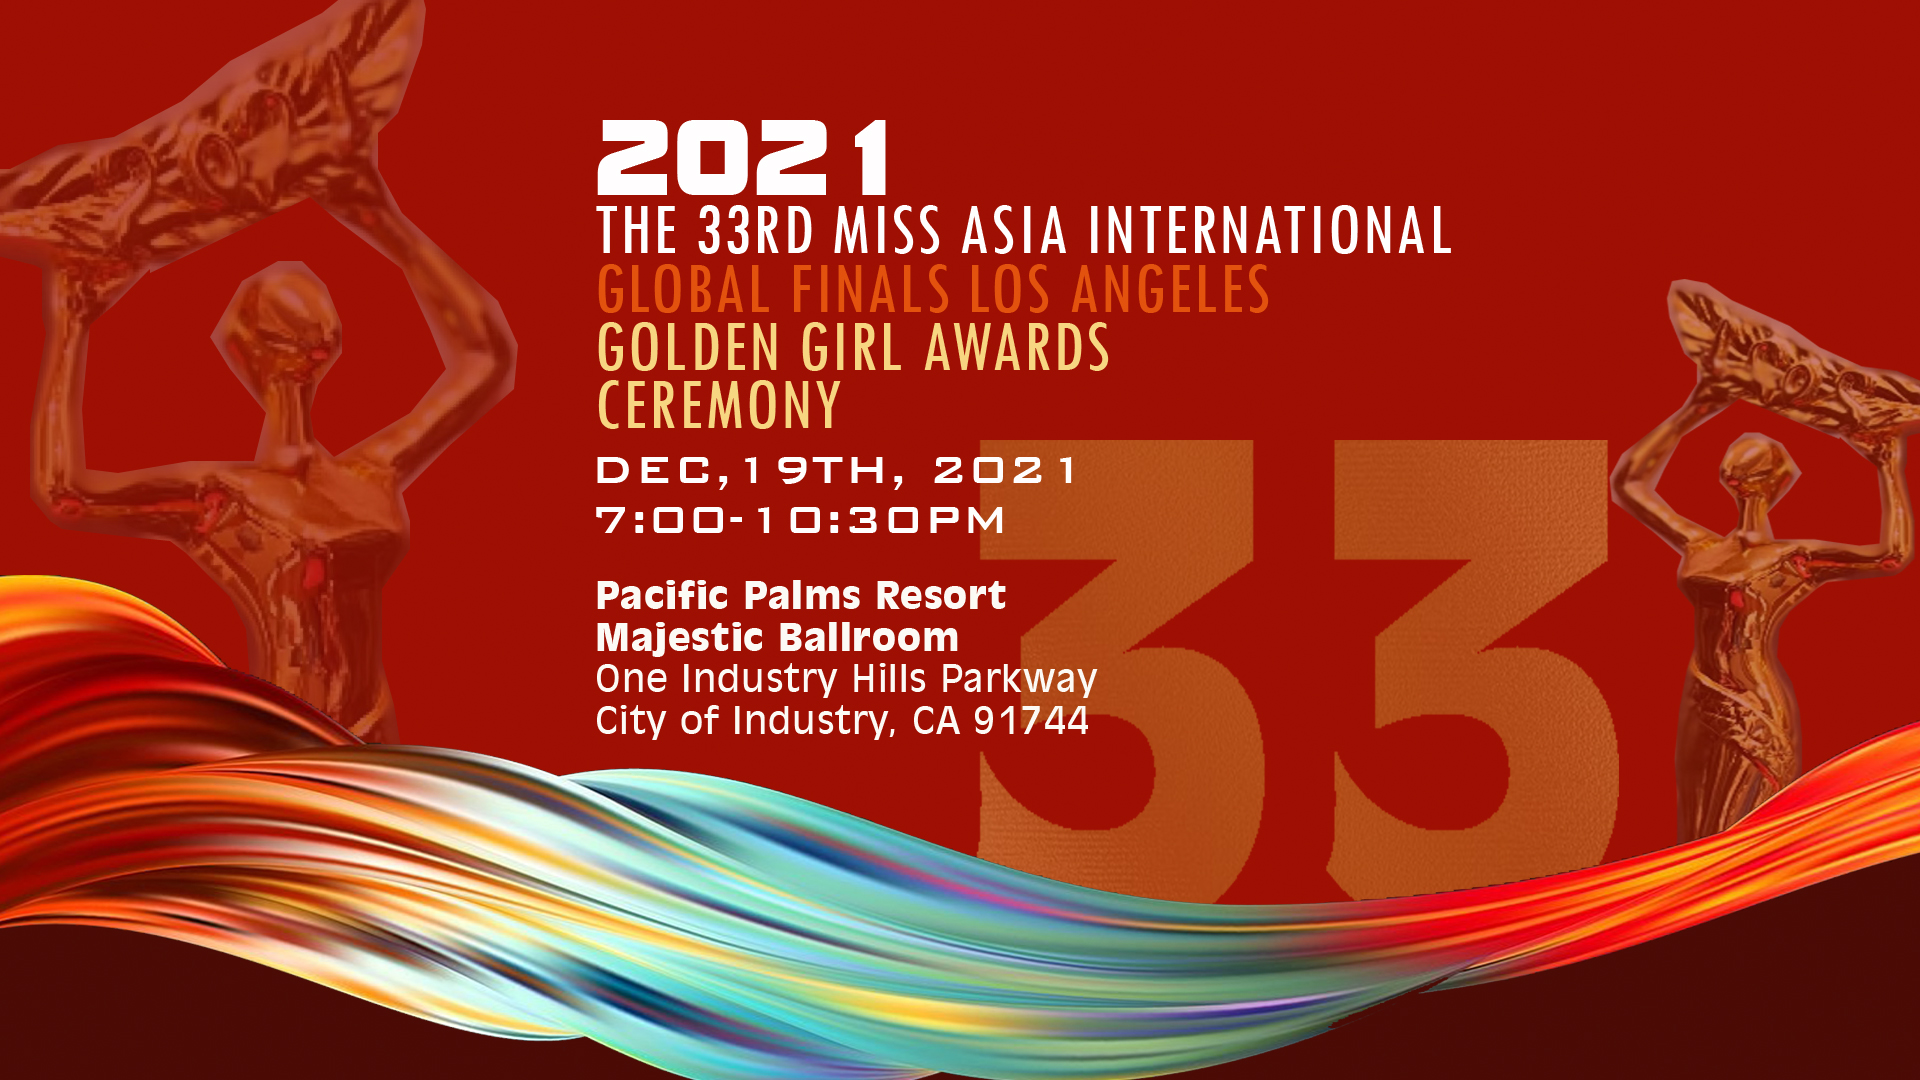 Welcome to Miss Asia International Global Finals Los Angeles 2021